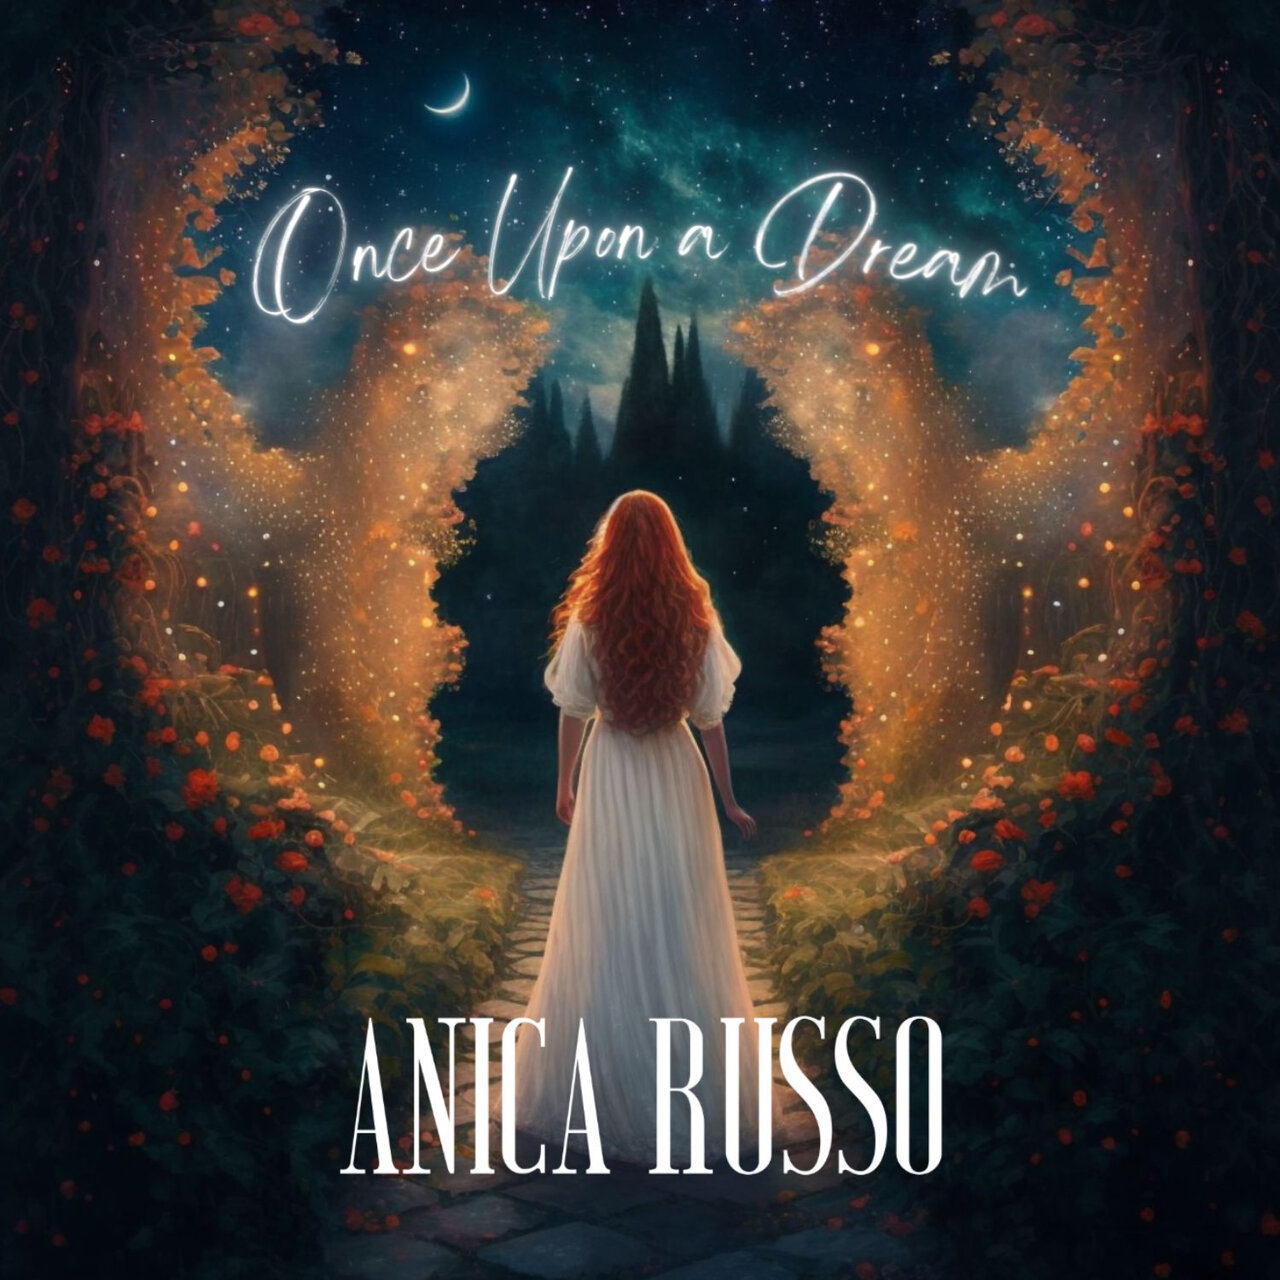 Anica Russo — Once Upon A Dream cover artwork